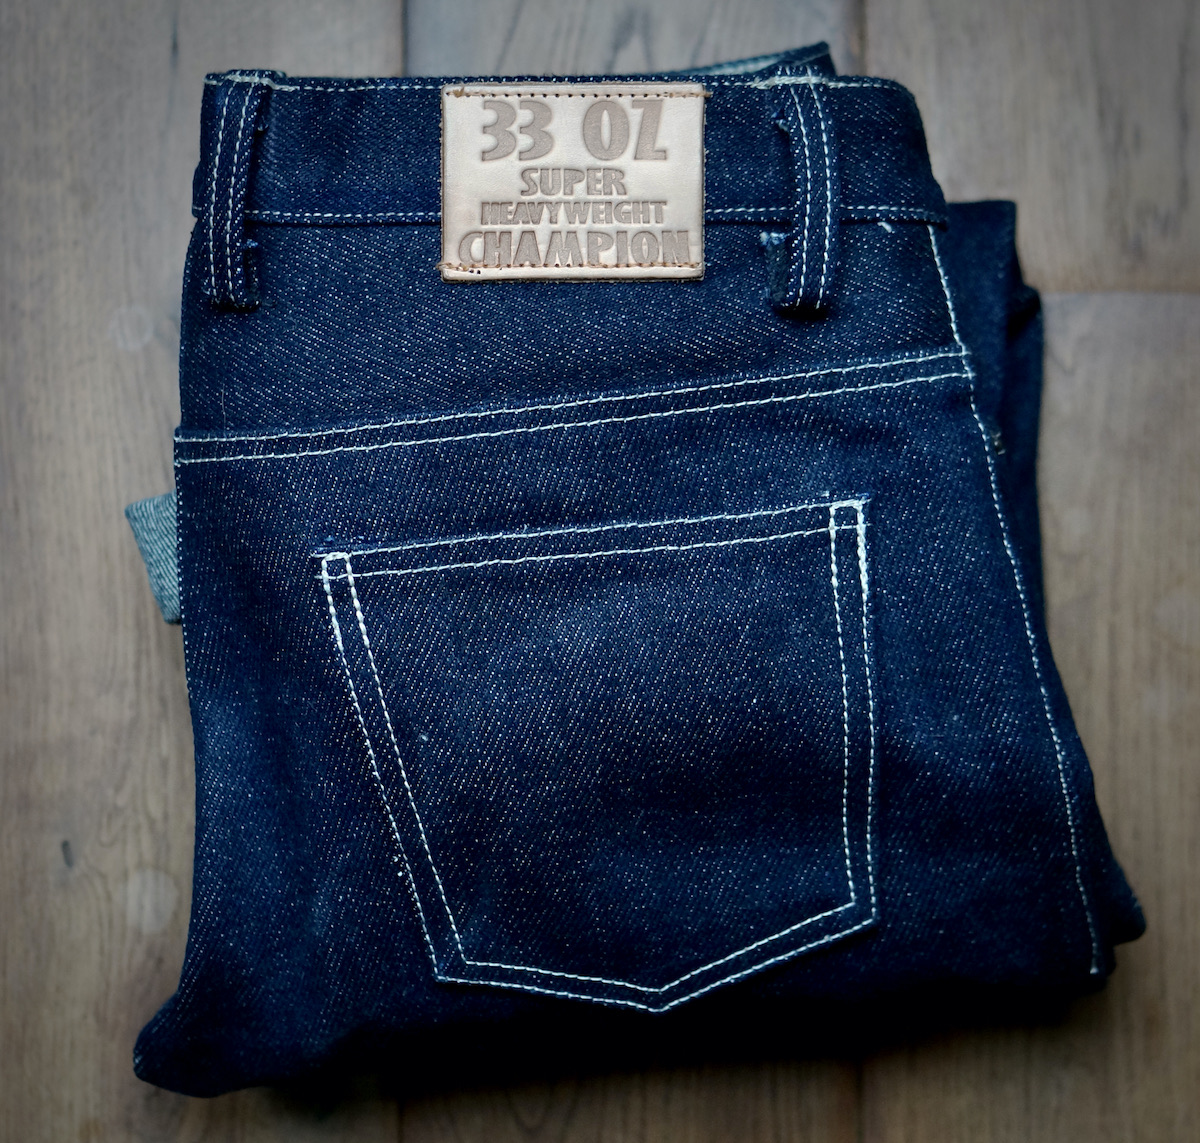 Why some pants and jeans have uneven belt loops spacing?